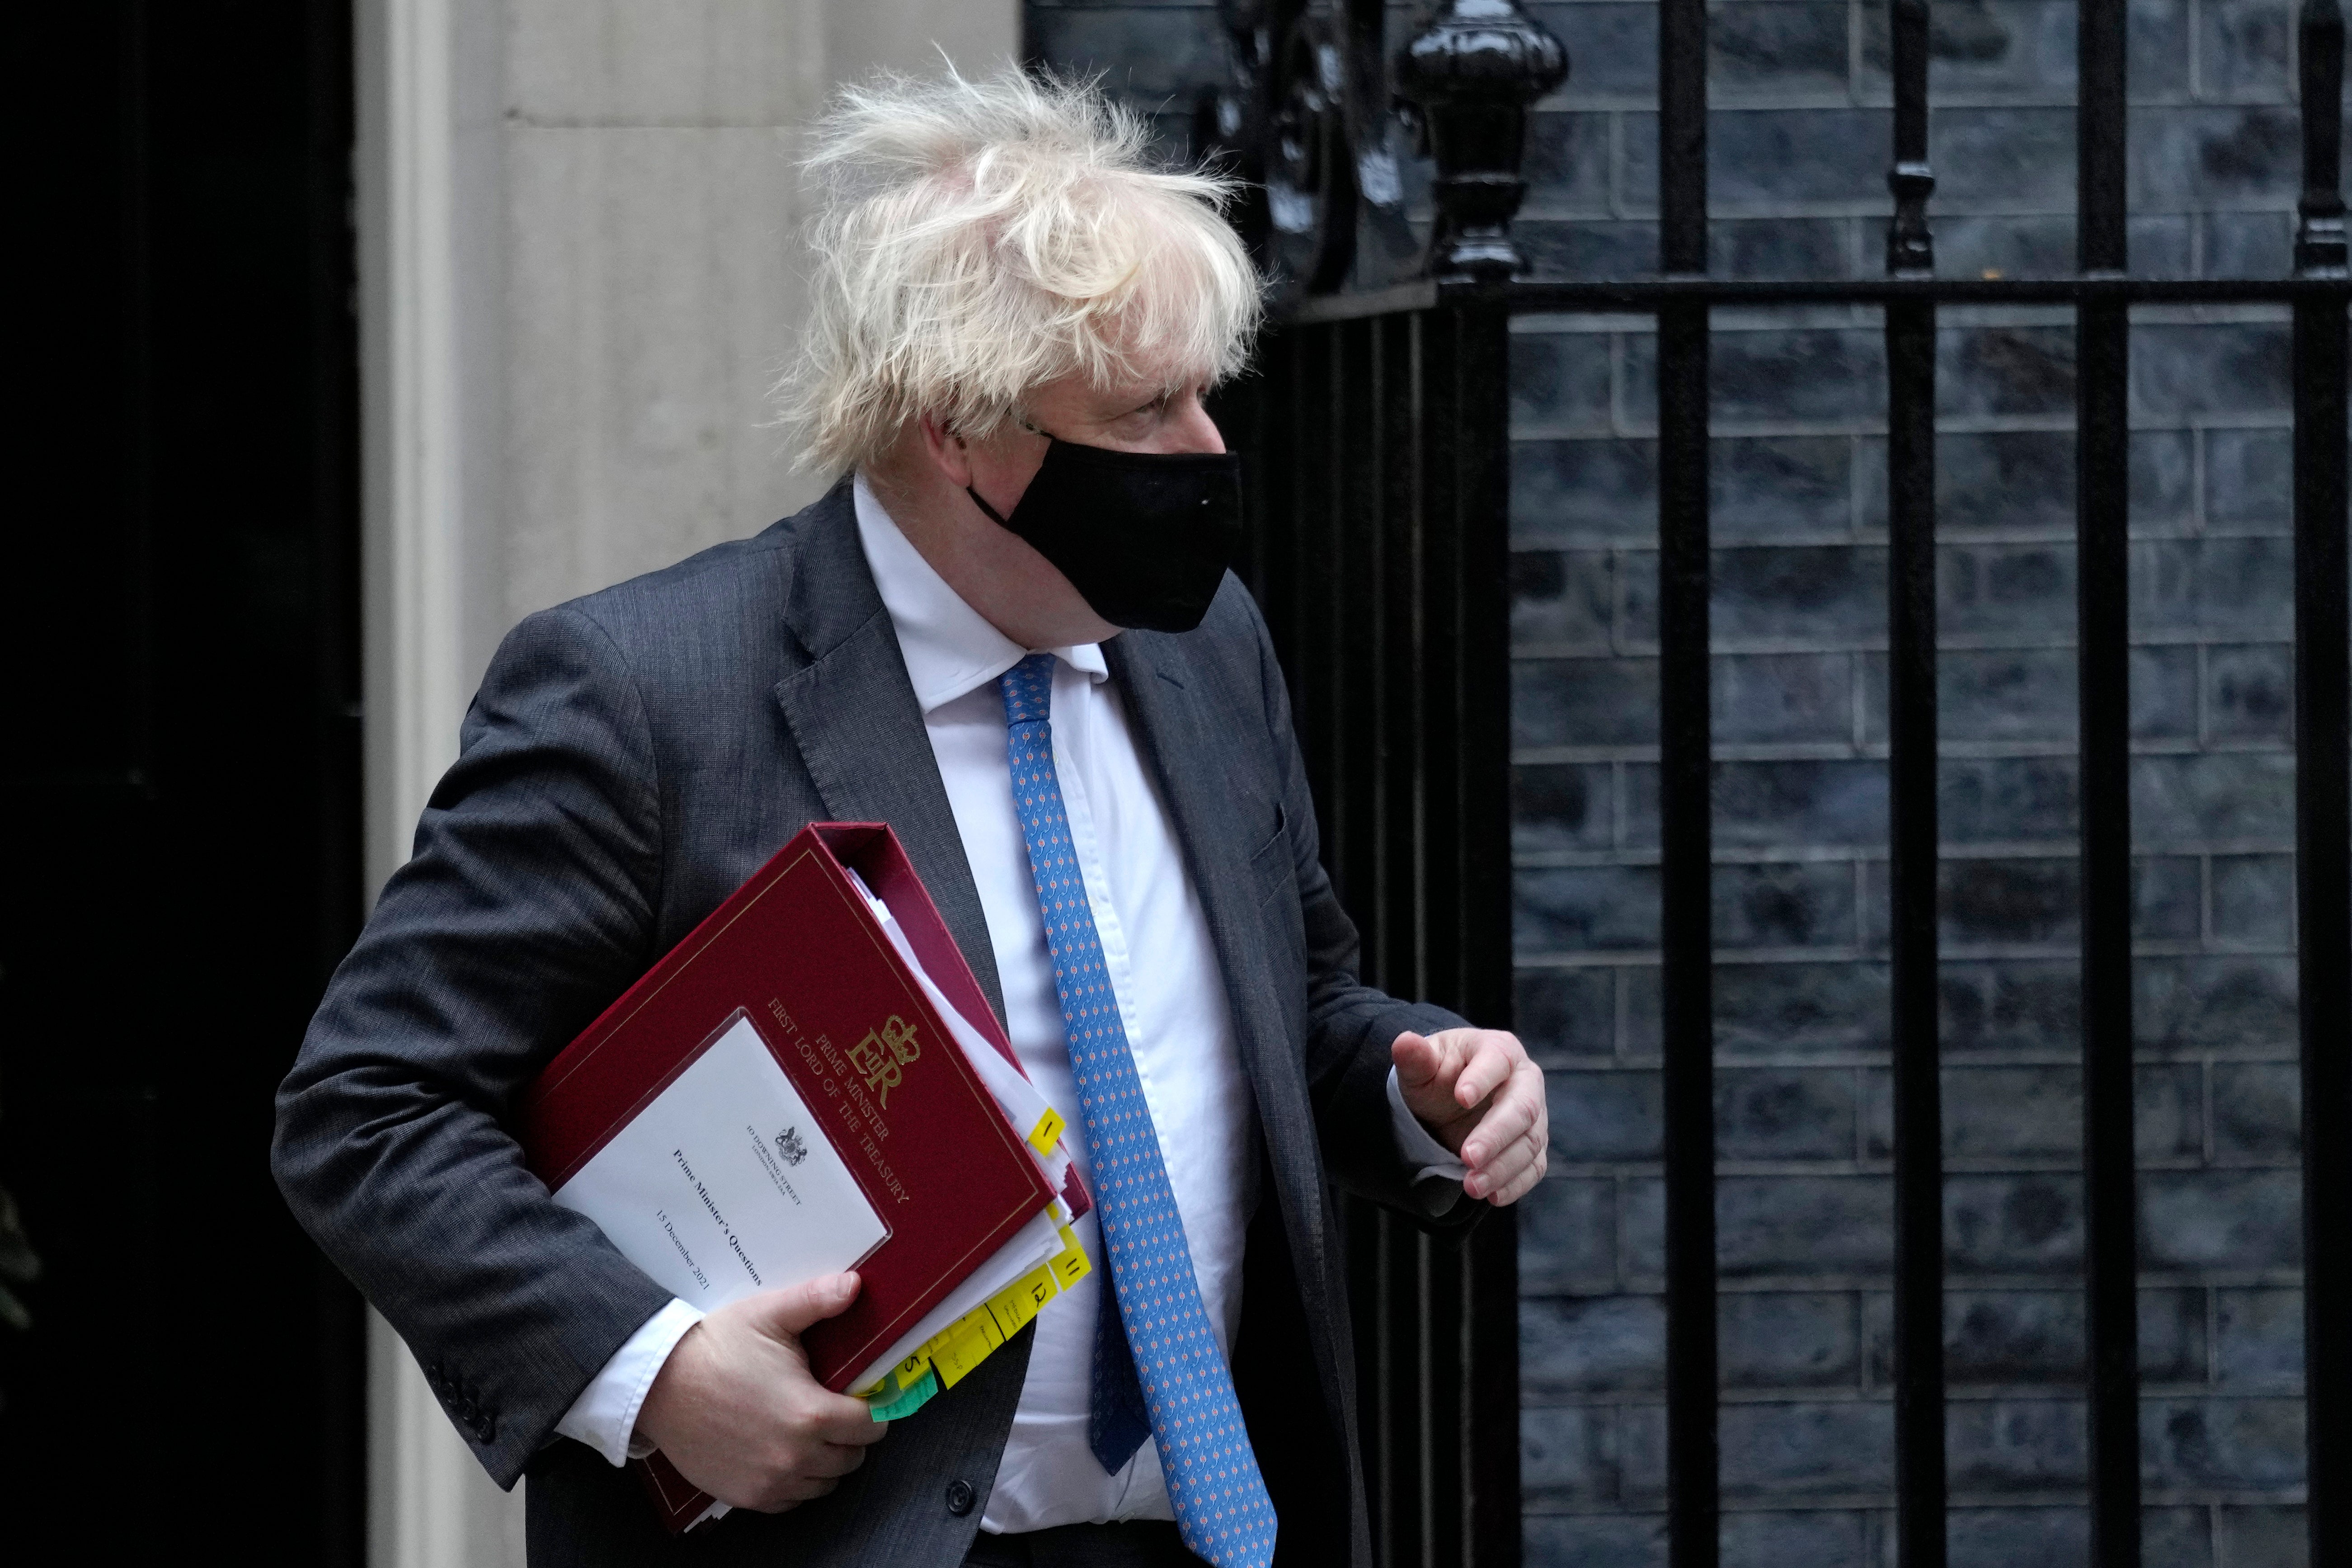 Boris Johnson leaves 10 Downing Street in a face mask